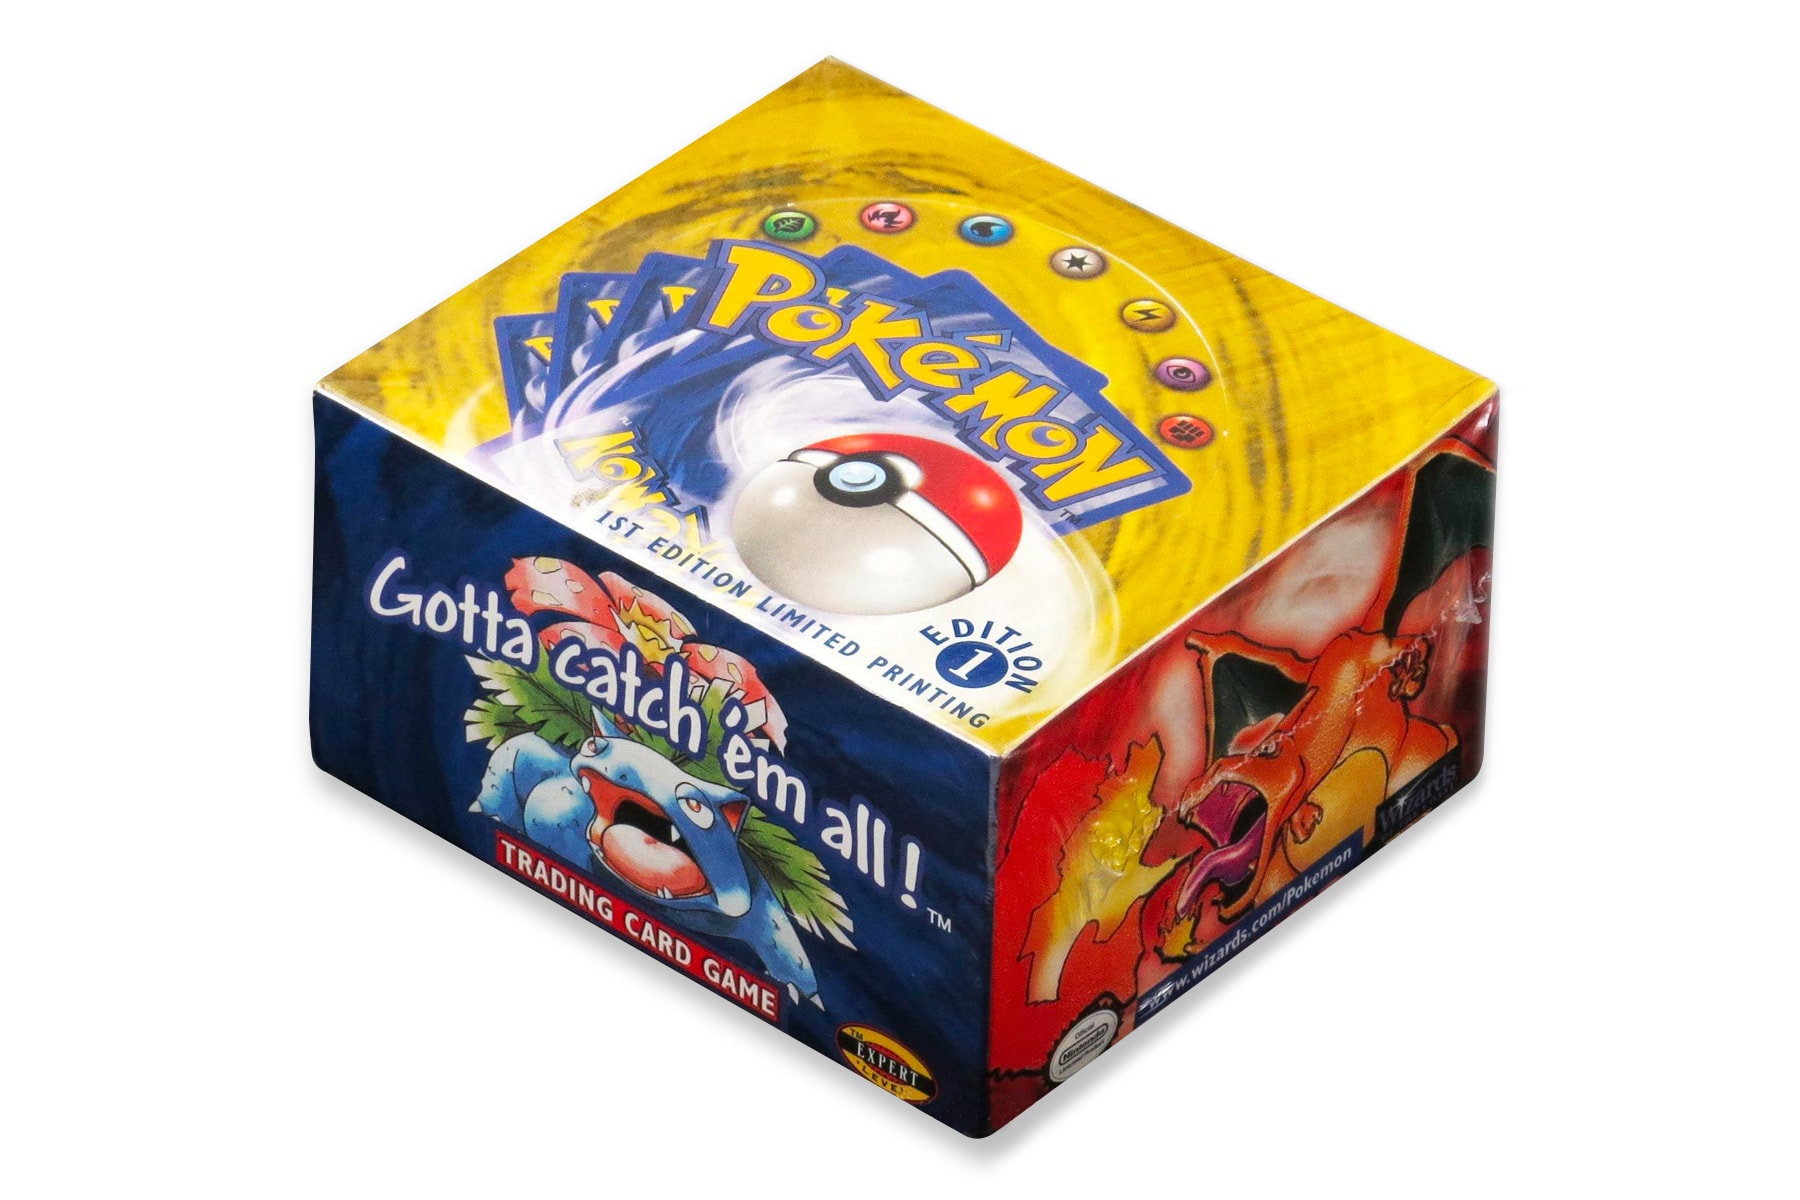 1999 Cards Box Sold 56000 K USD Trading Game Wizards of the Coast The Pokémon Company Auction 1st Edition Limited Printing English Base Set Unopened Booster Box PSA 10